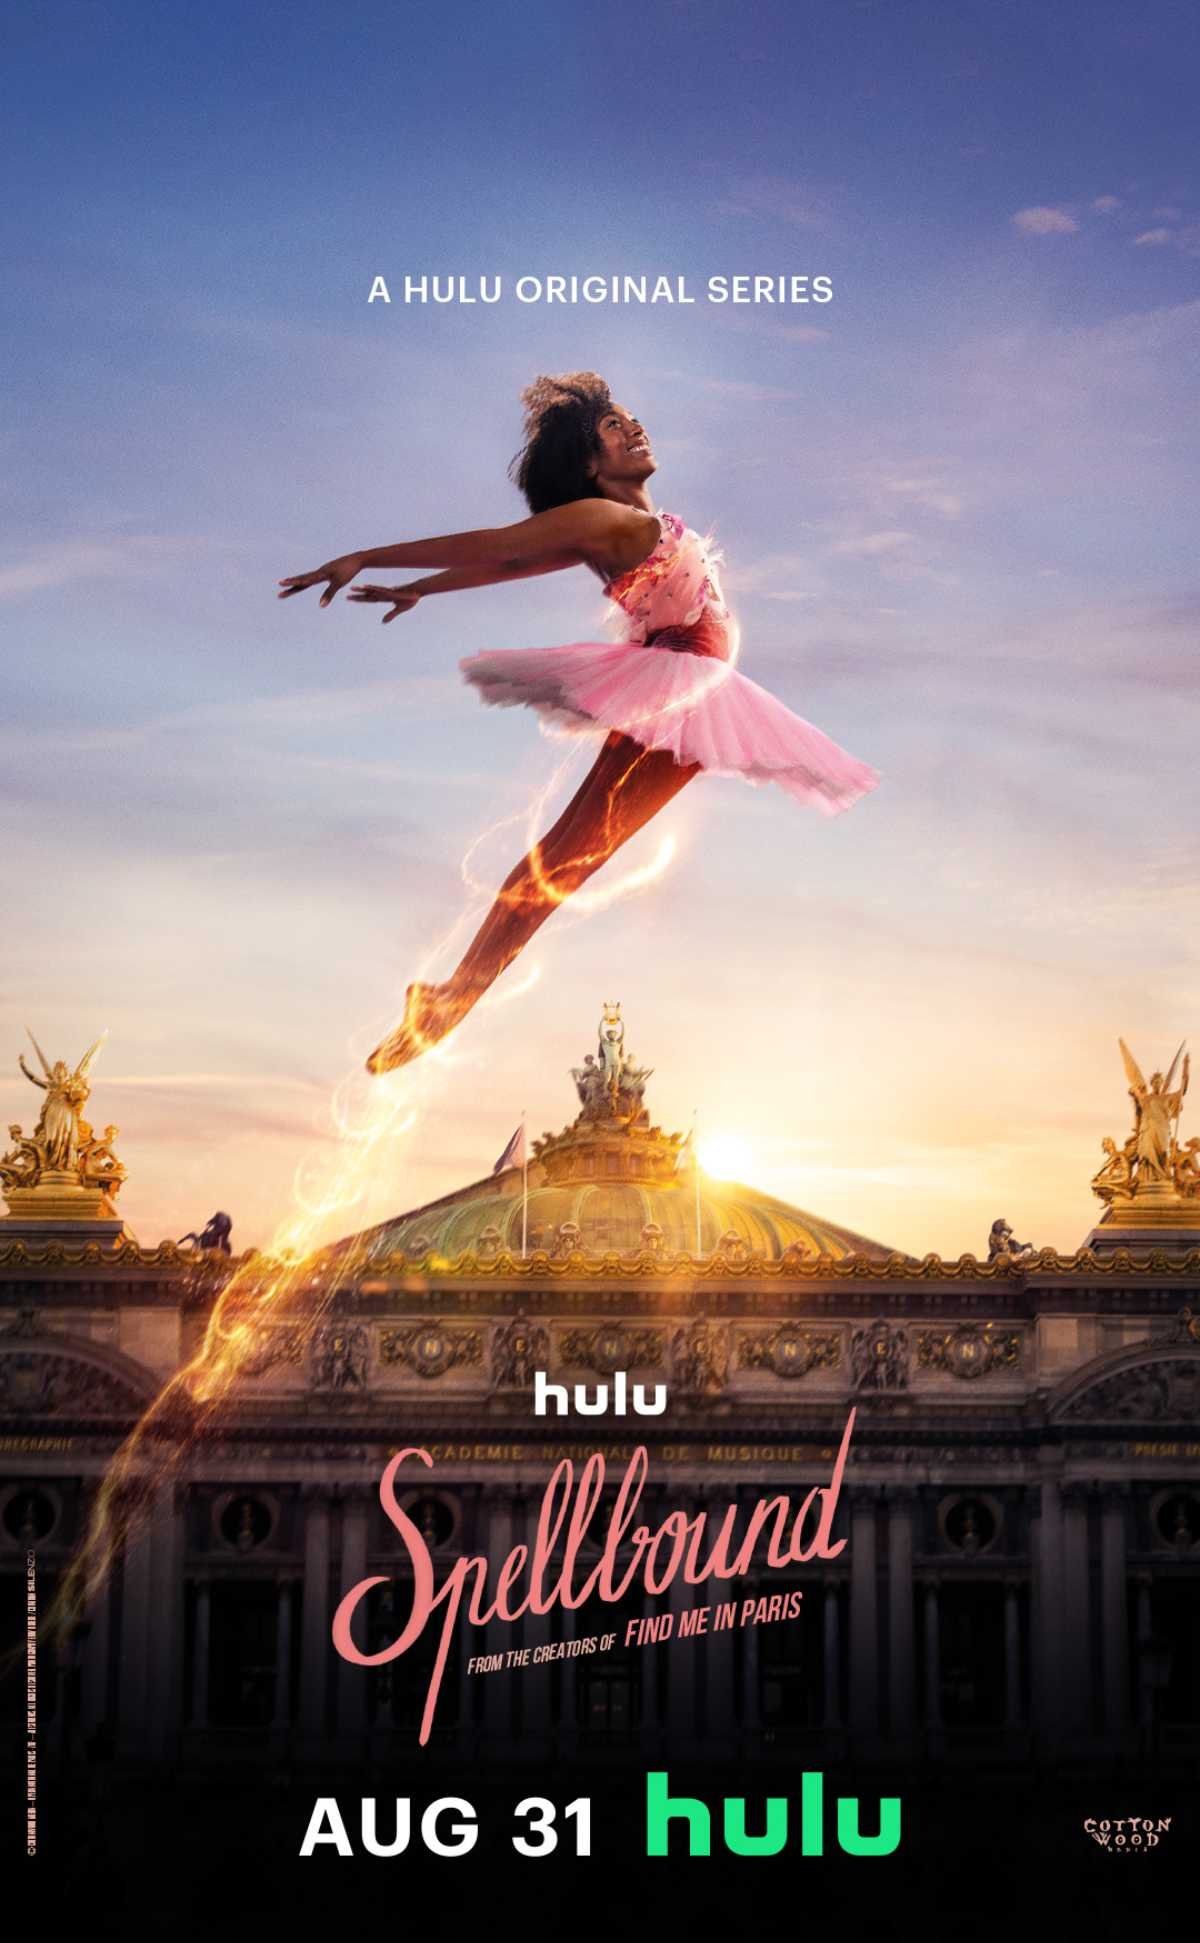 Hulu Original Series "Spellbound" - Available to Watch Now